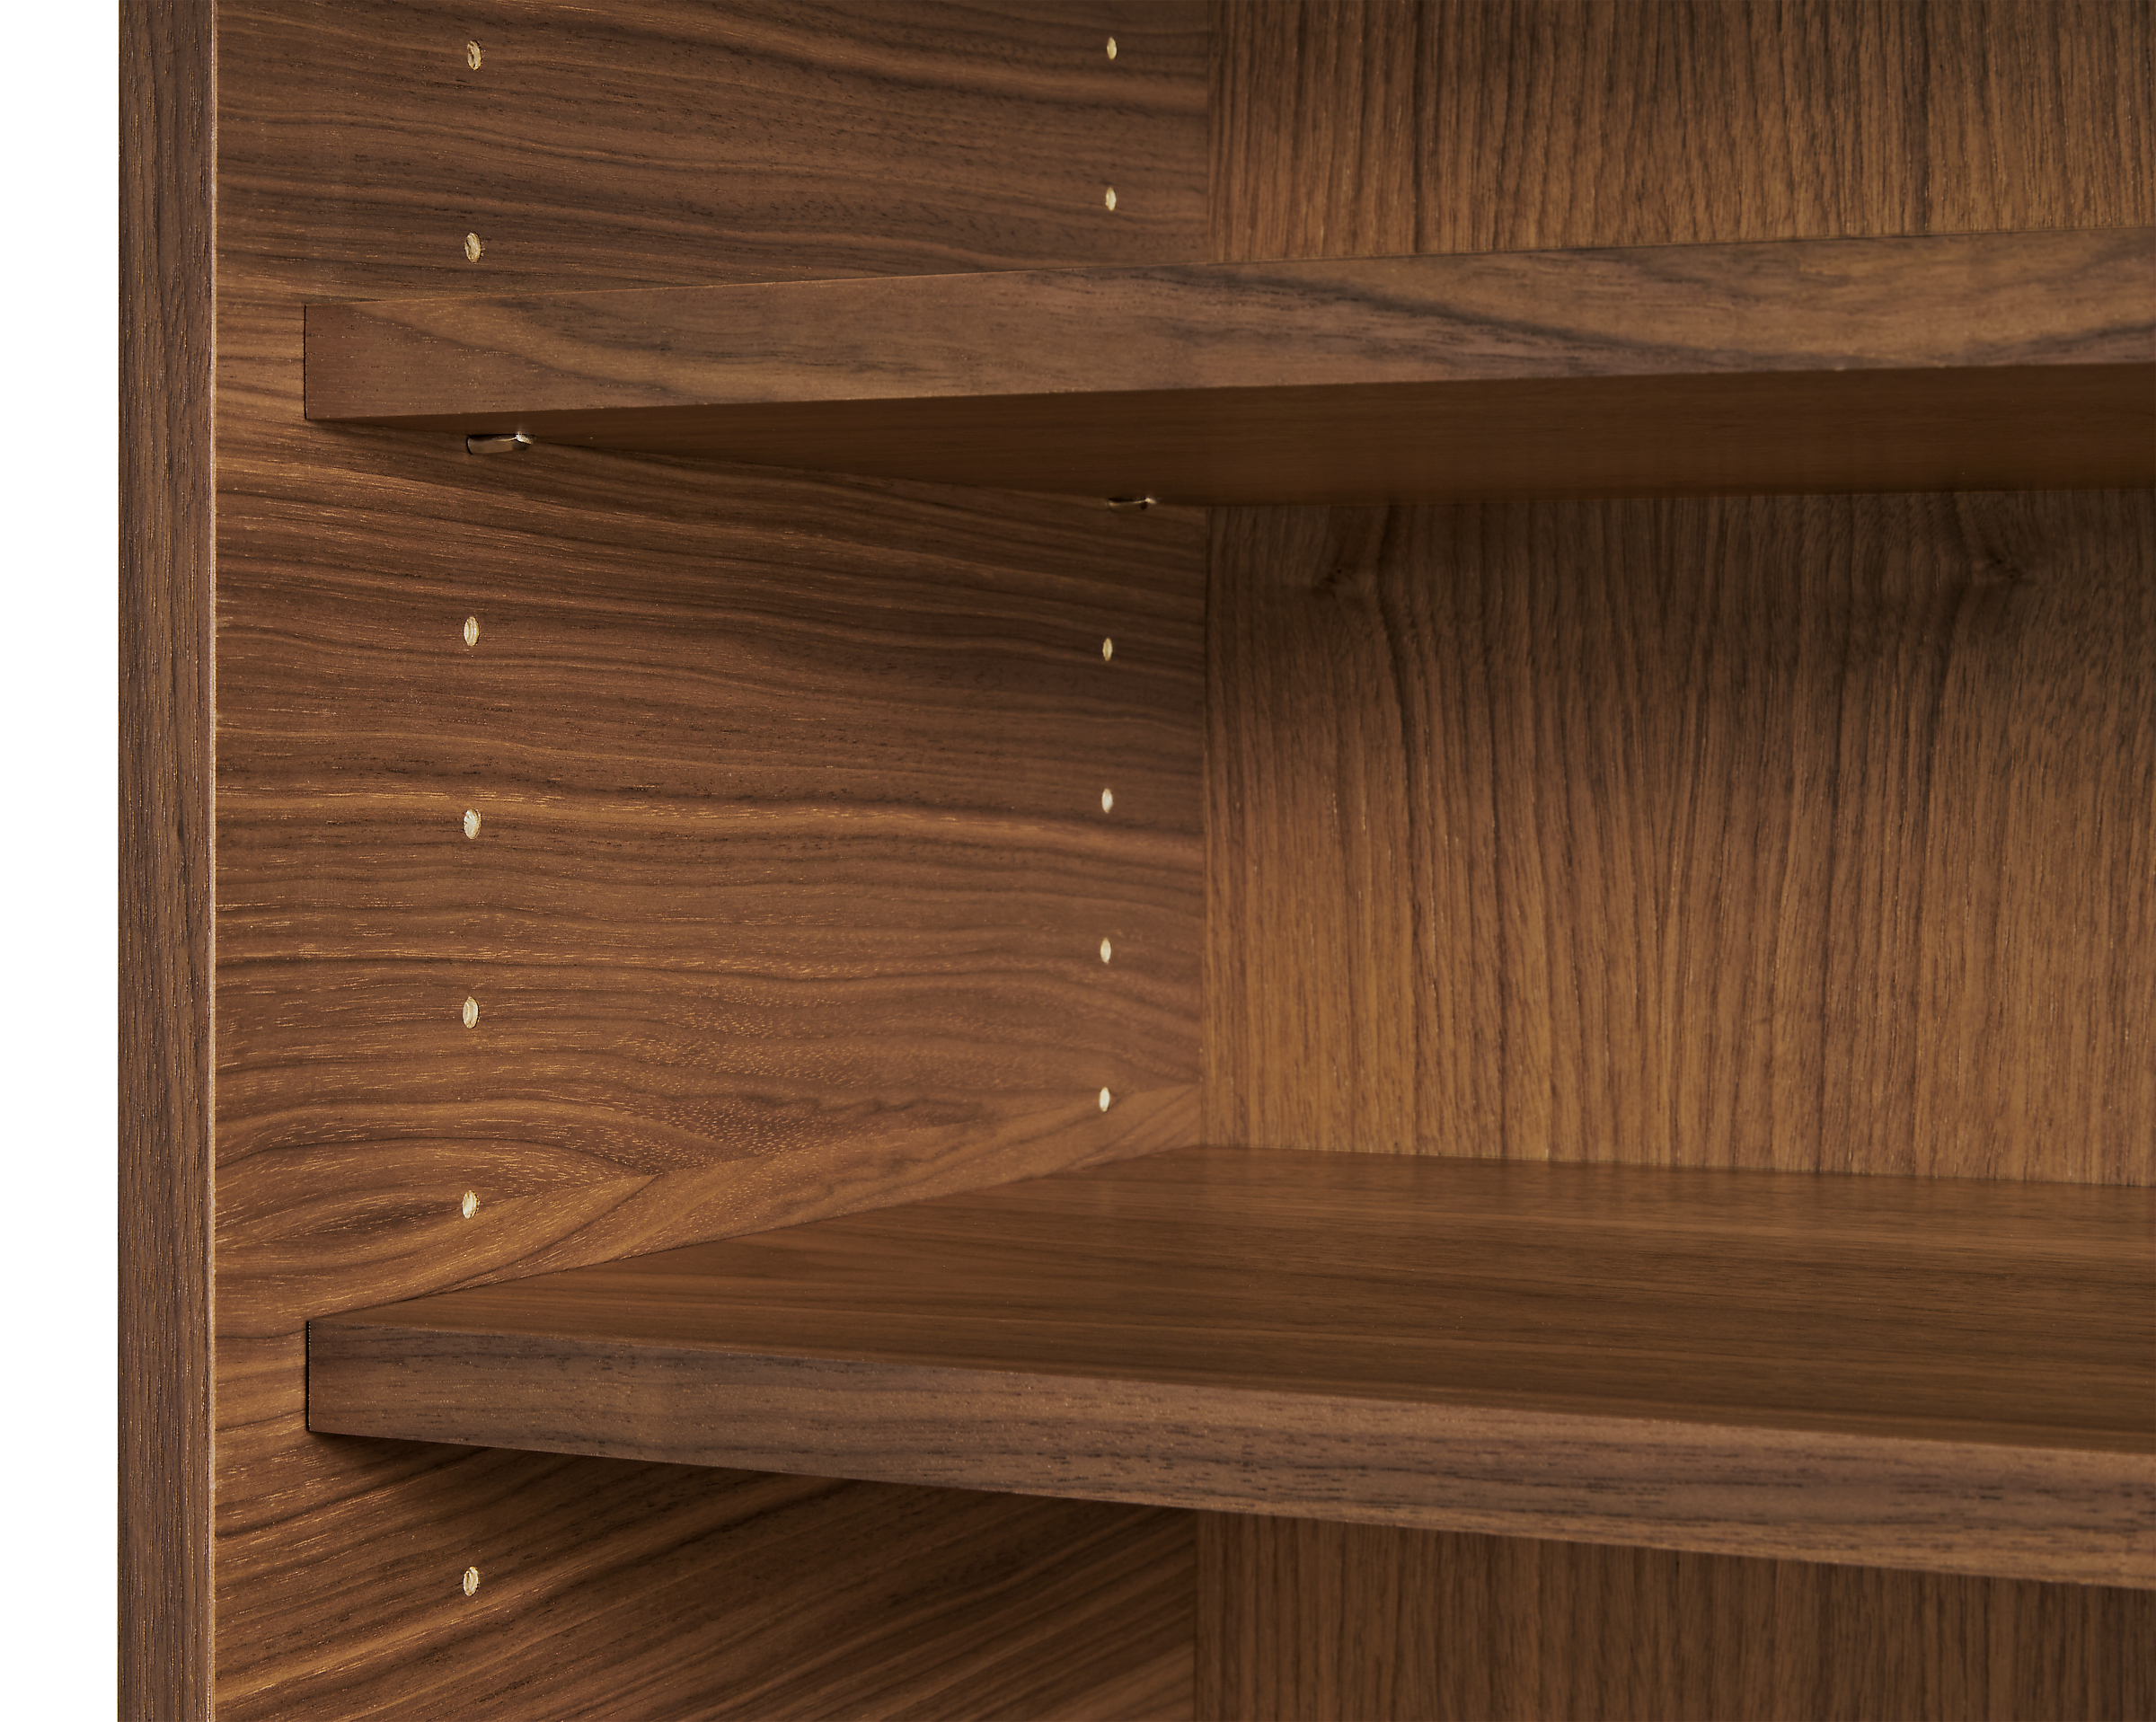 close-up of taylor wood shelves in walnut in open space piece.